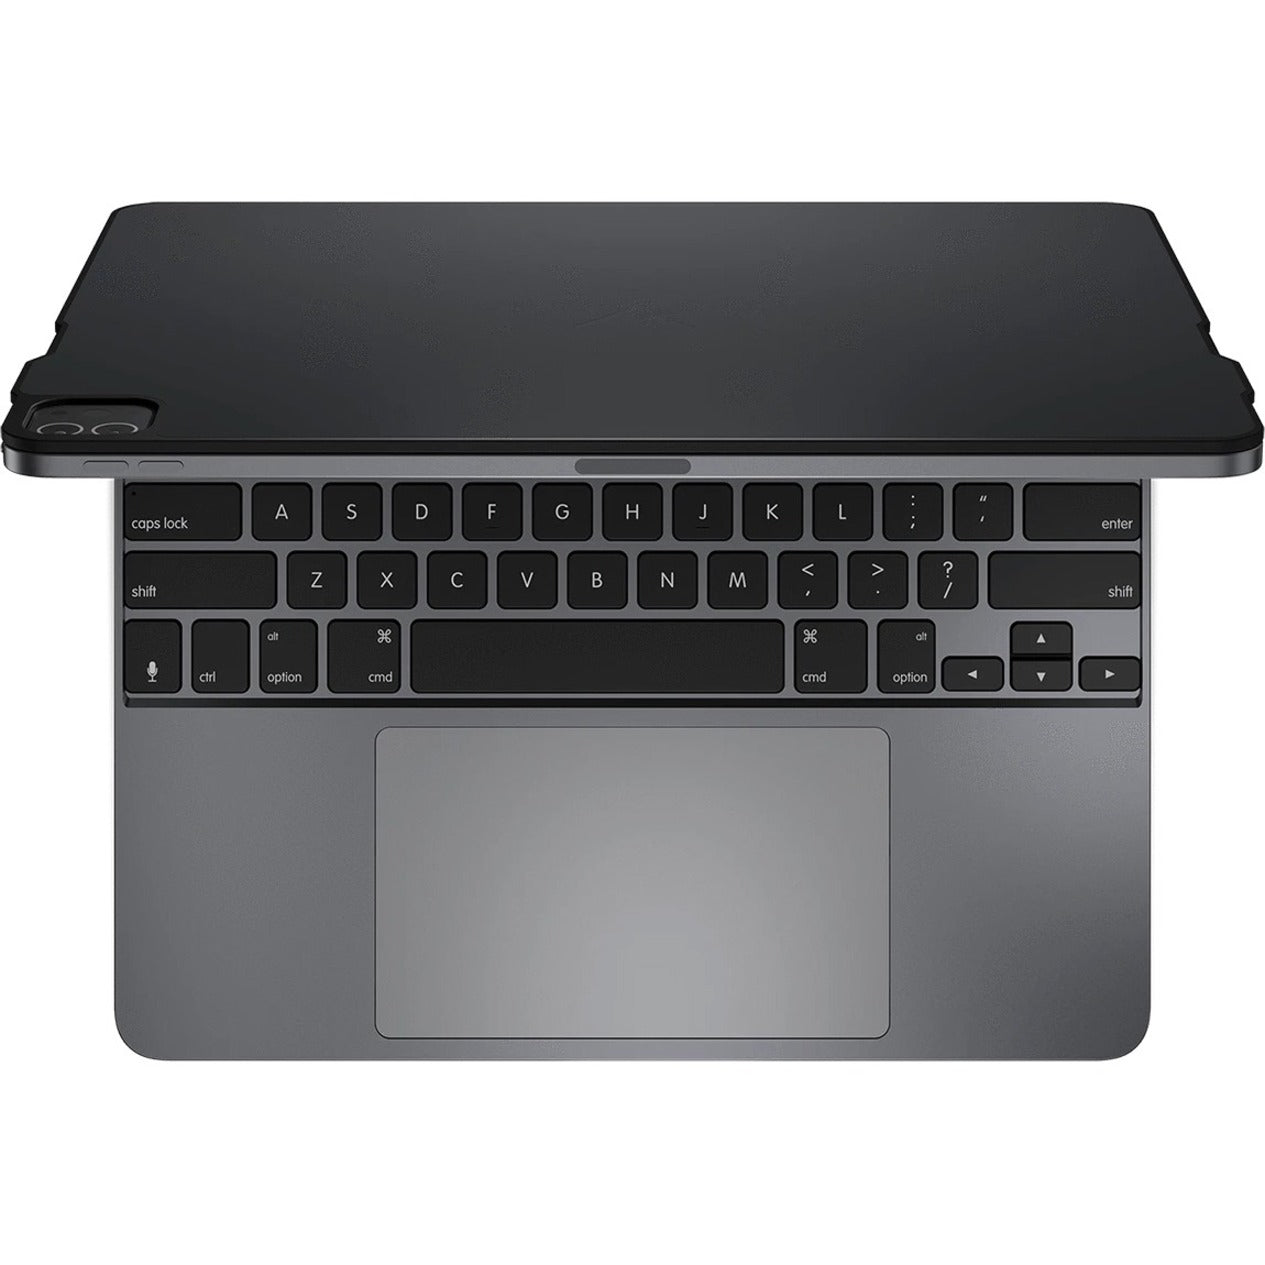 Brydge BRY6032 12.9 MAX+ Wireless Keyboard With Trackpad For iPad Pro 12.9-inch, Space Gray, Backlit, Bluetooth 5